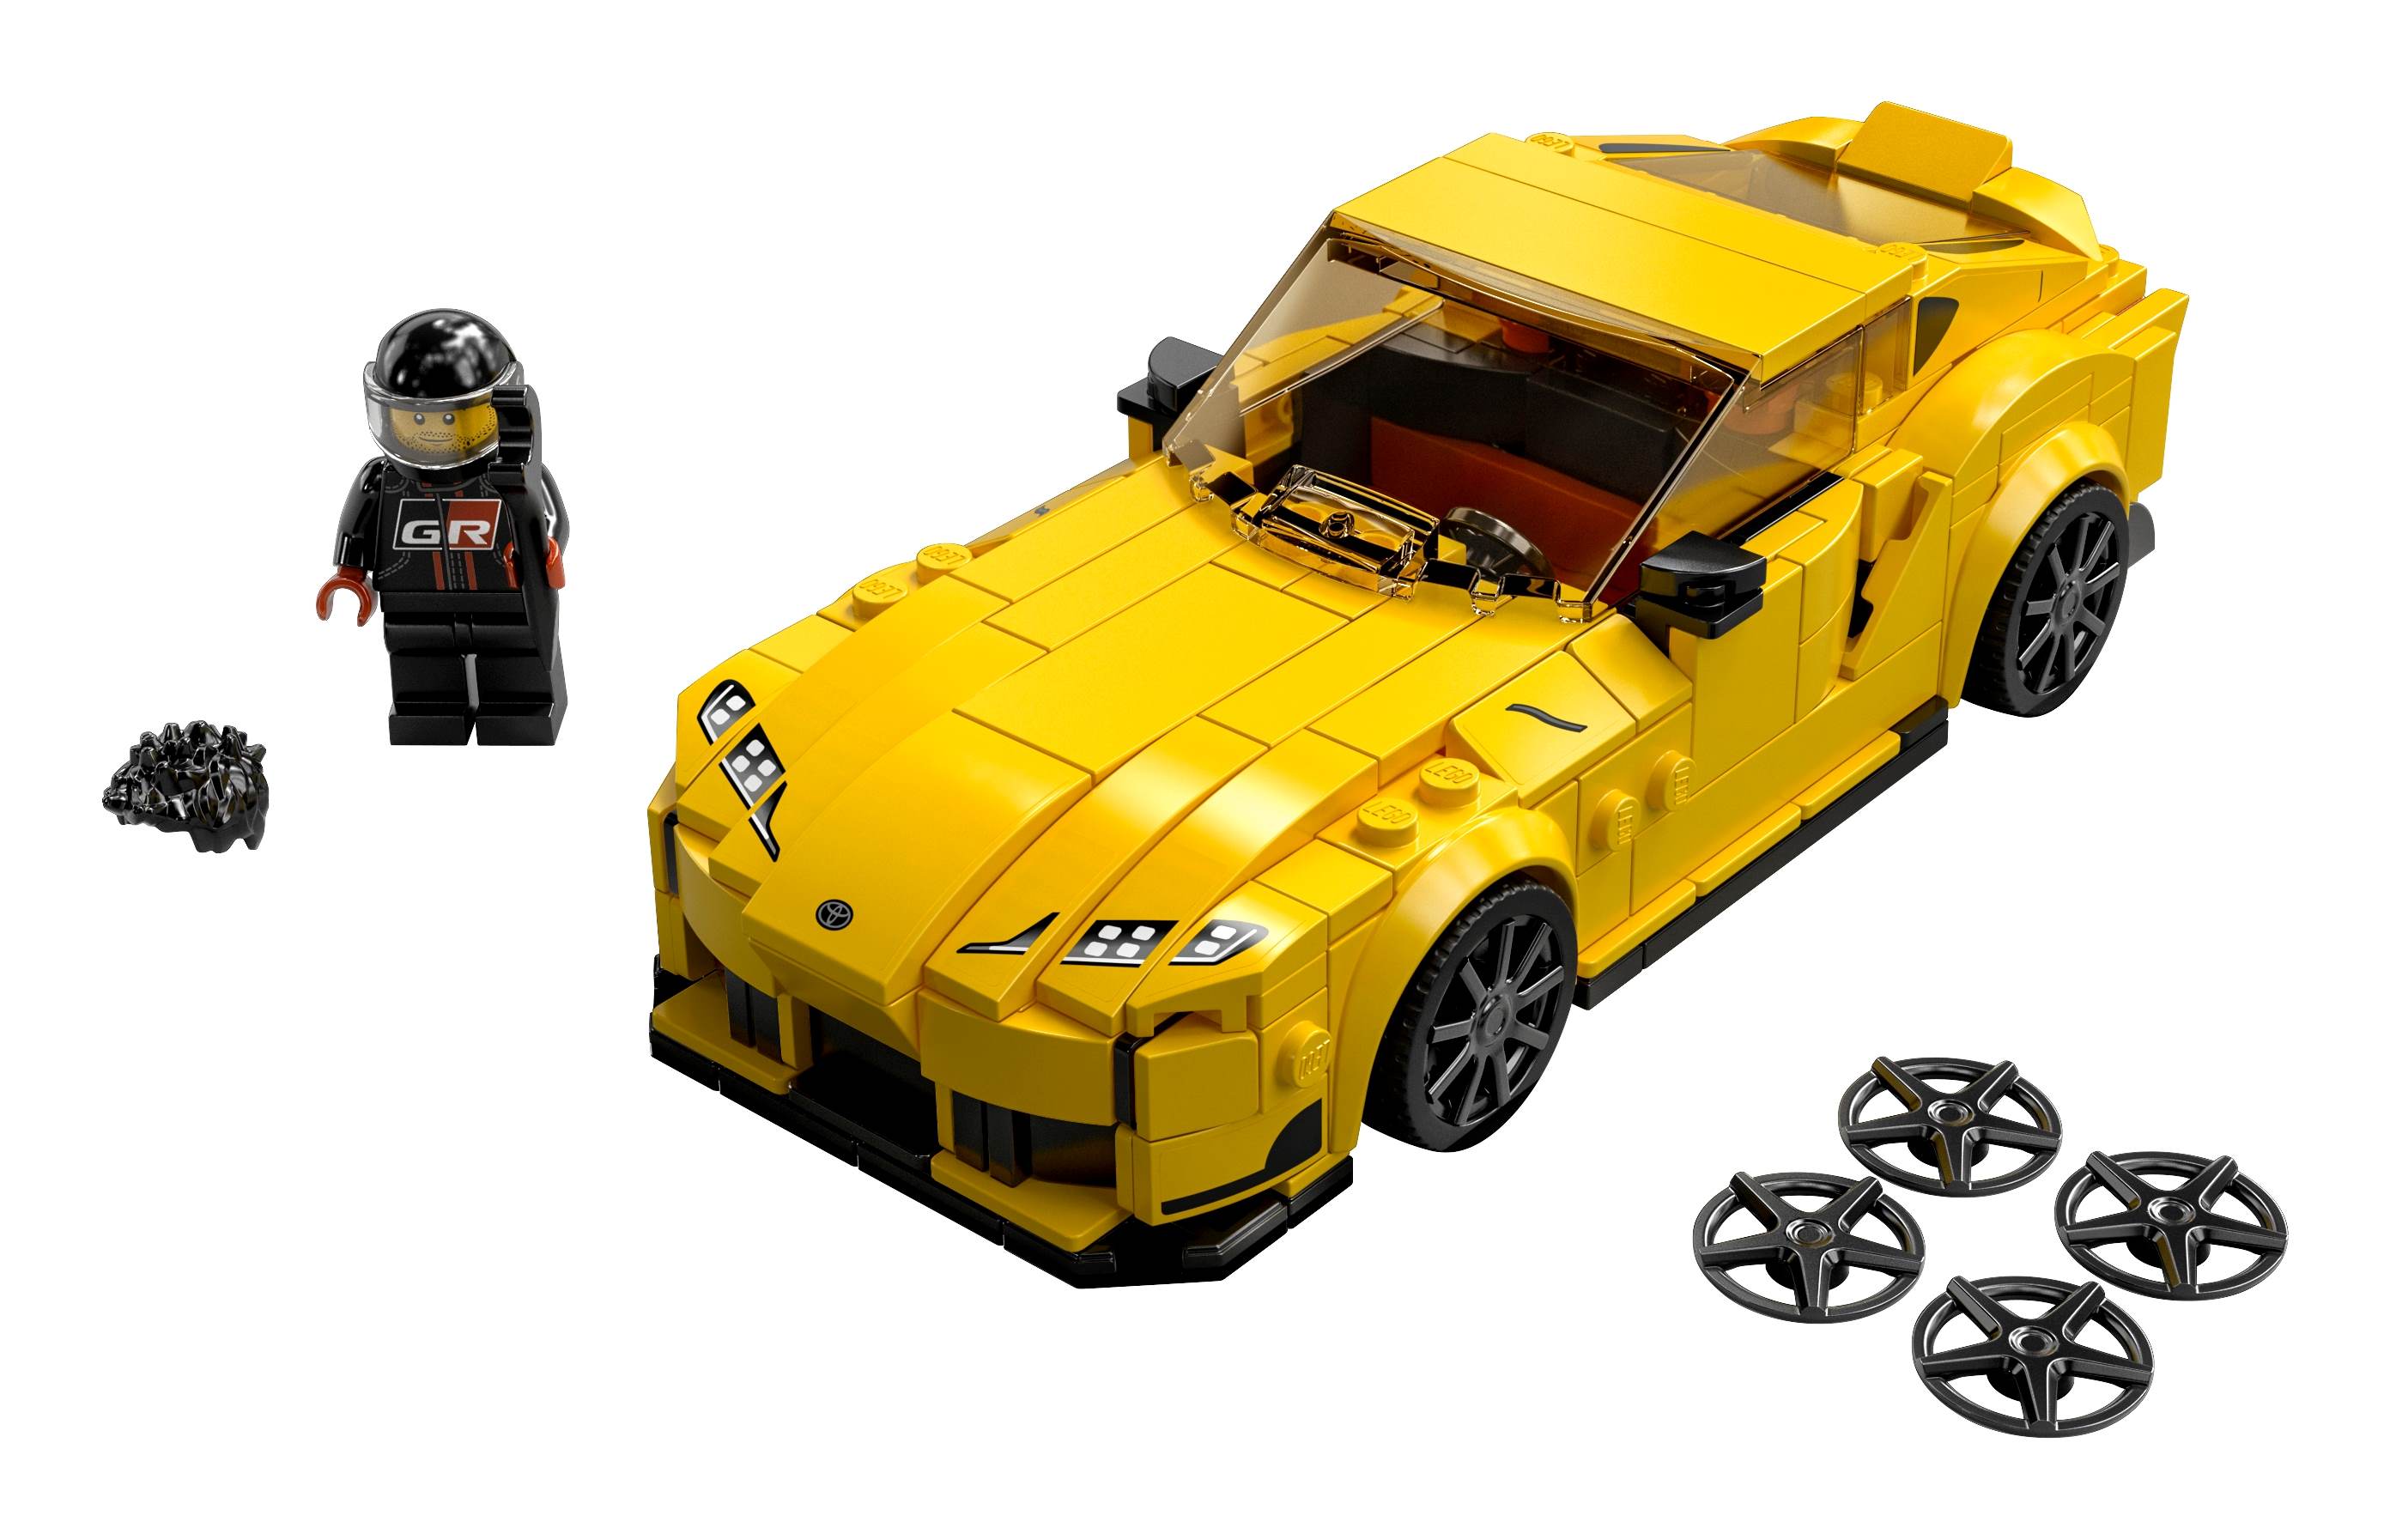 12-fascinating-facts-about-lego-car-sets